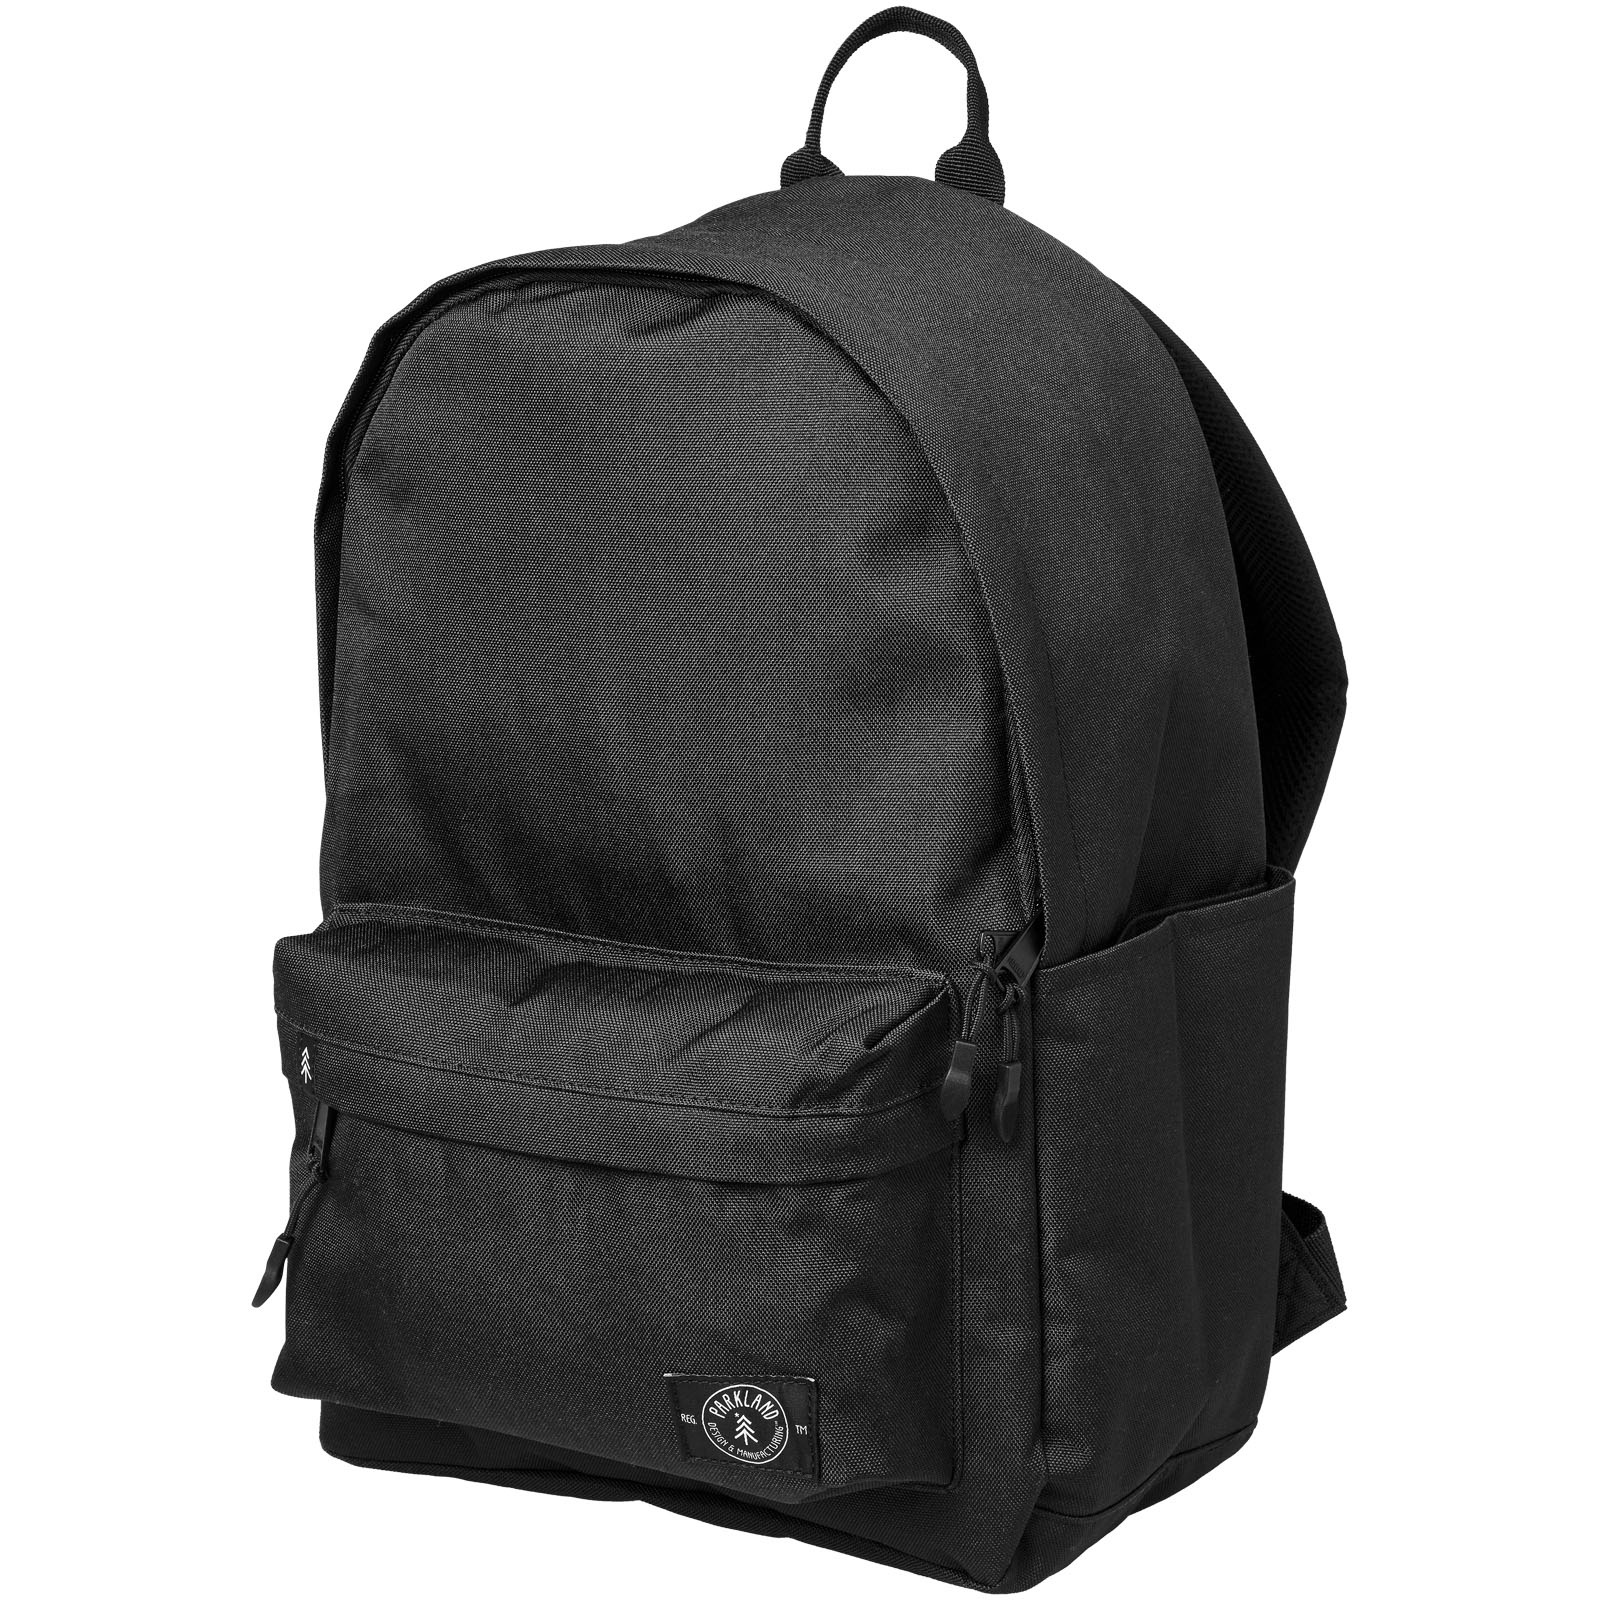 Hinton Parva backpack made from recycled bottles - Leeds